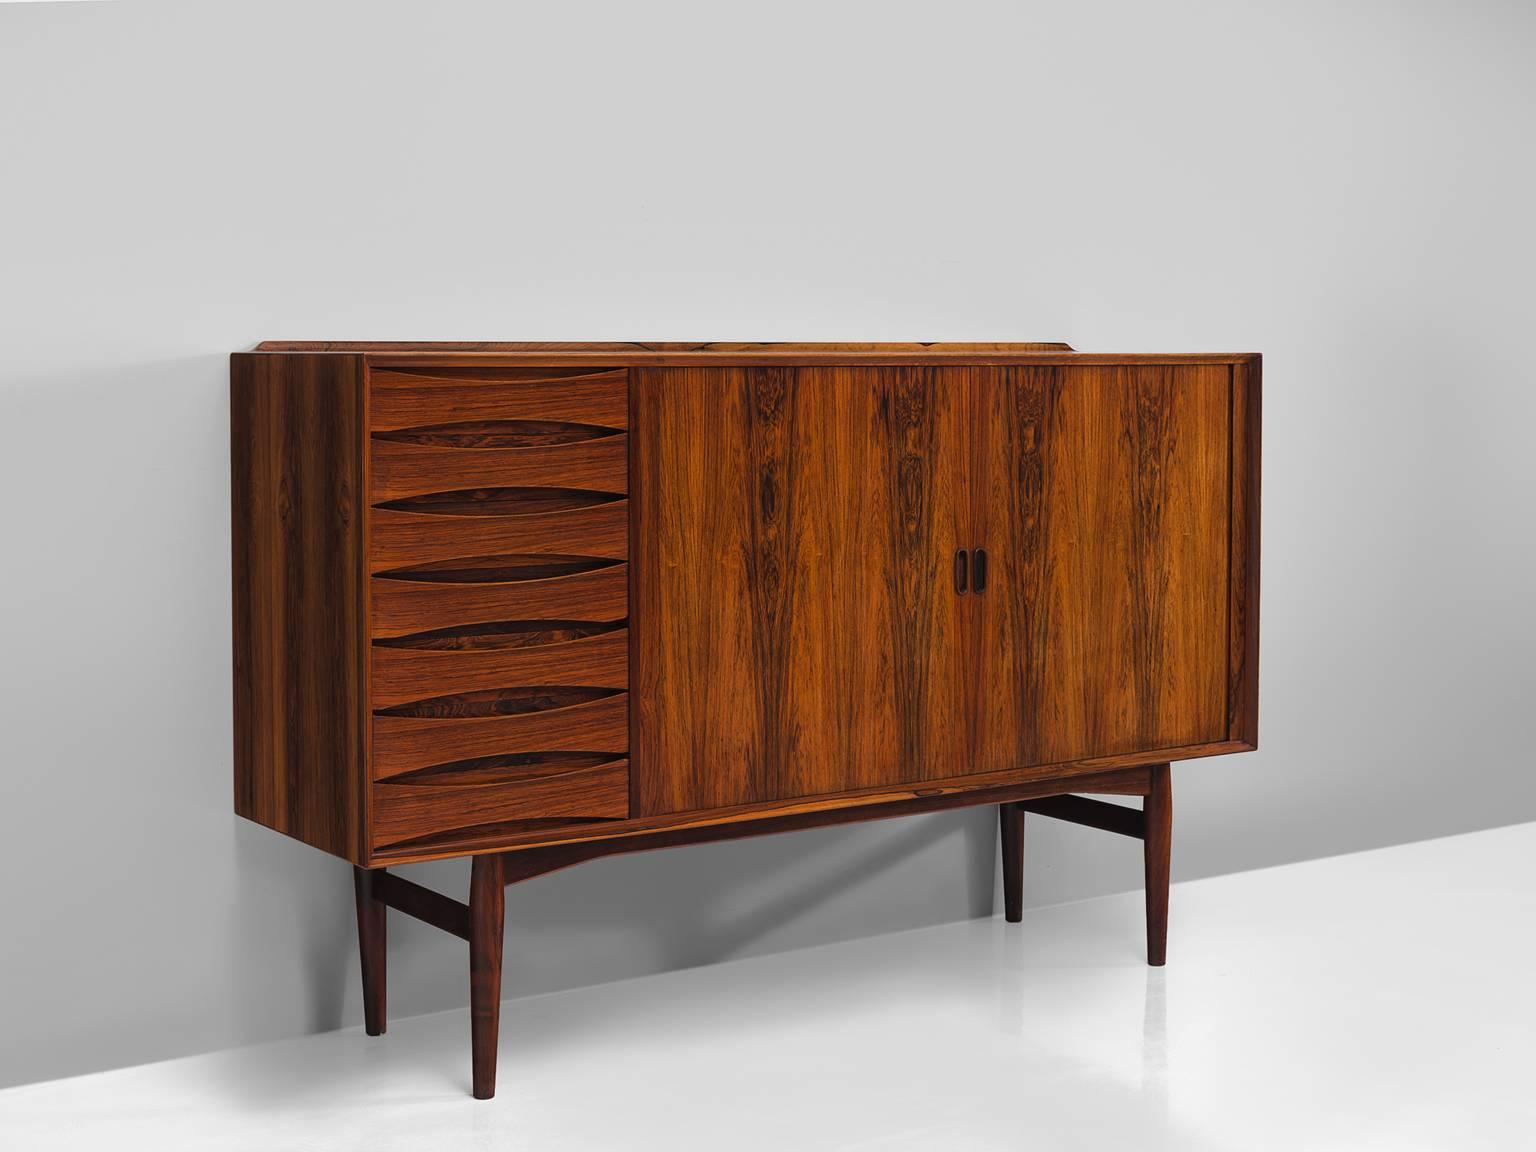 Arne Vodder for Sibast furniture, cabinet, rosewood, Denmark, 1960s.

This small rosewood sideboard is designed by Arne Vodder and is an iconic example of Danish midcentury furniture both in finish, aesthetics and use of material. The main